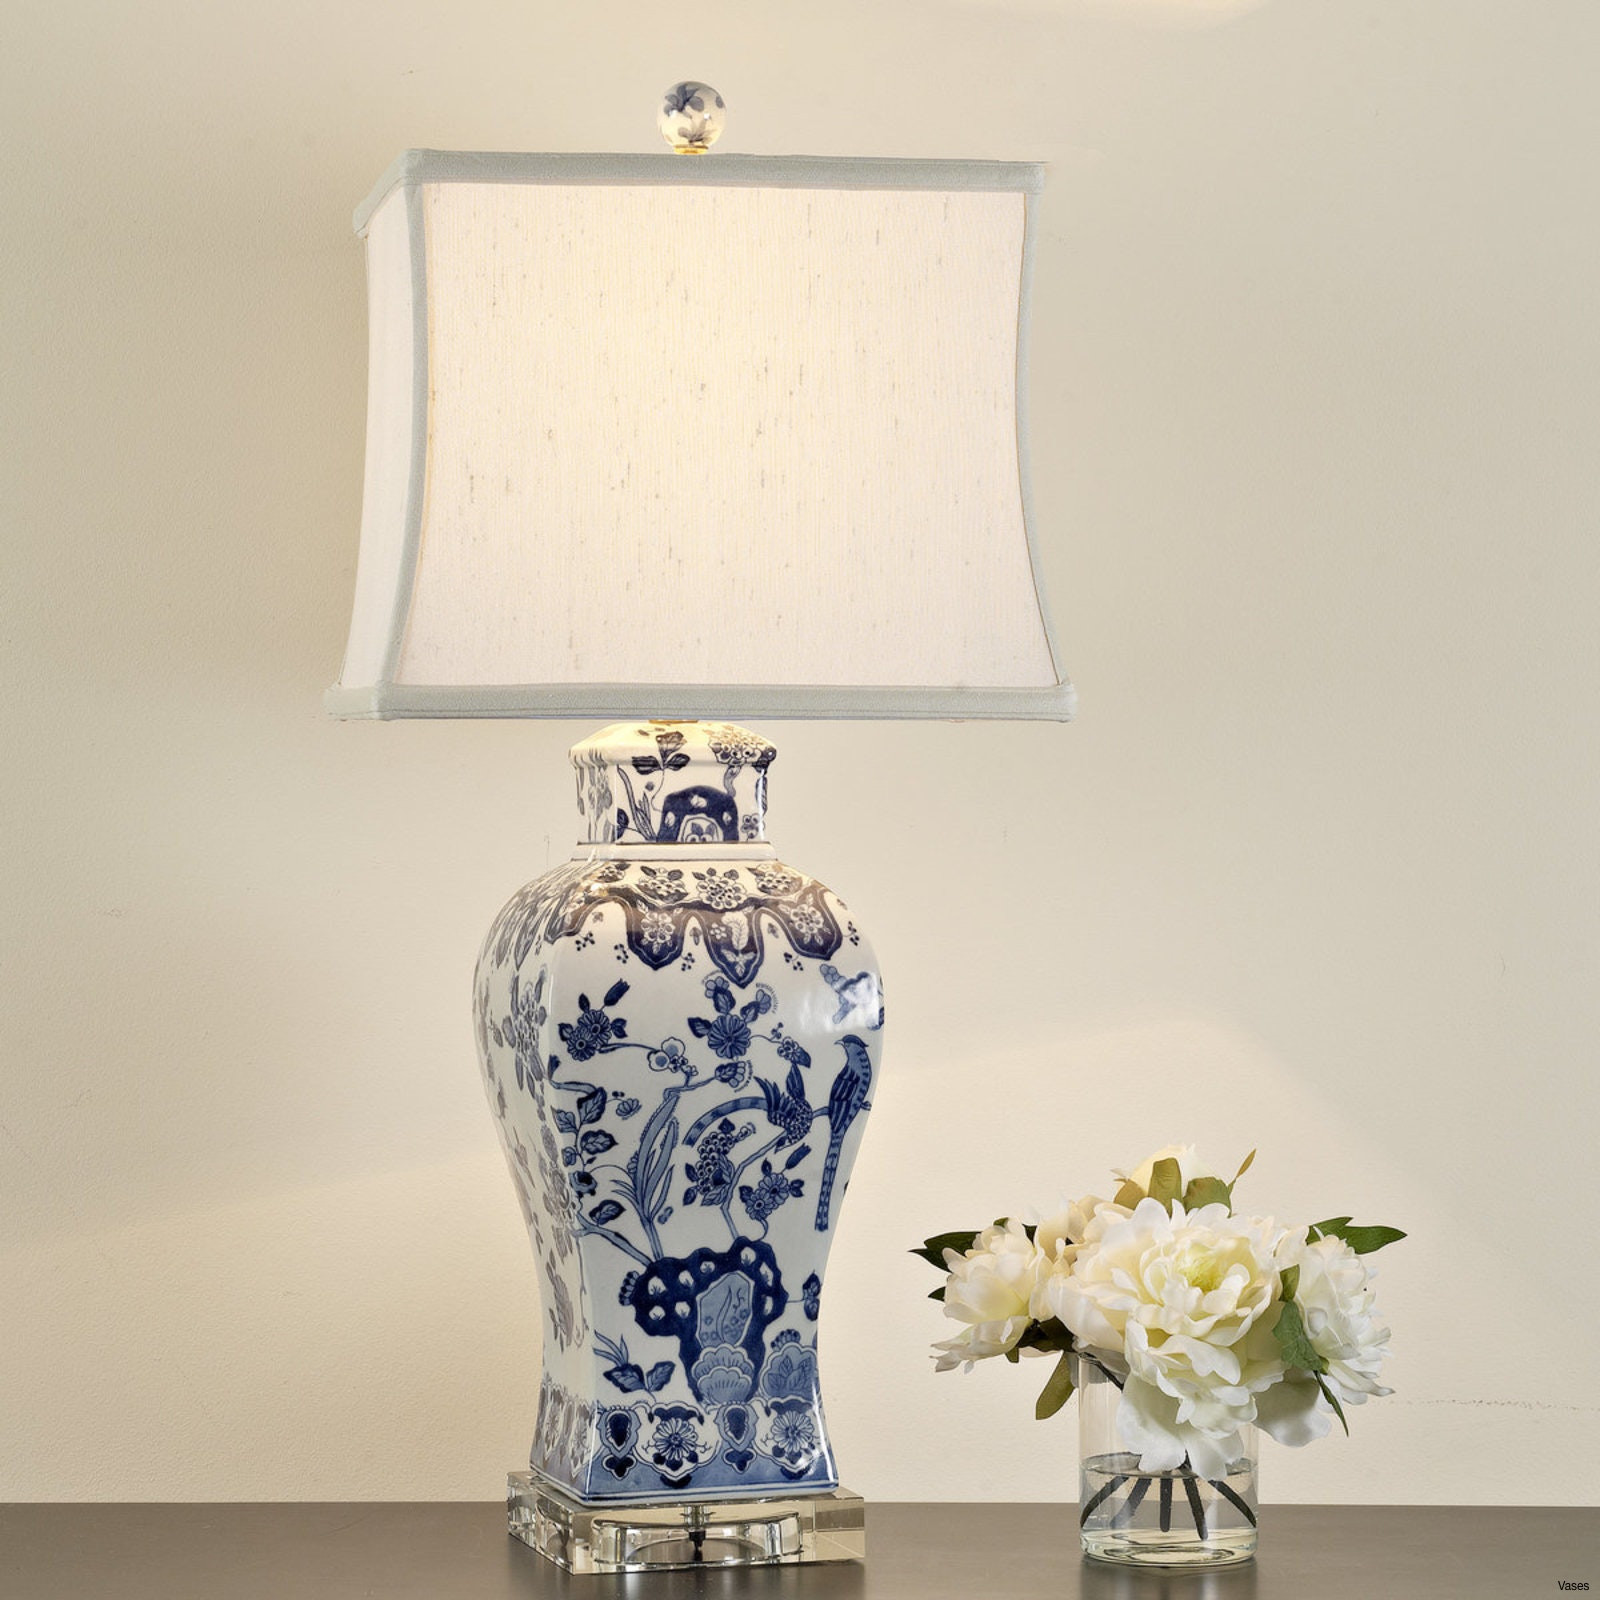 17 Lovely Blue and White Vases Cheap 2024 free download blue and white vases cheap of 33 unique porcelin table lamps creative lighting ideas for home inside 81iiuu4fqhl sl1500 h vases vase lamp amazon oriental furniture 26 floral blue white home 